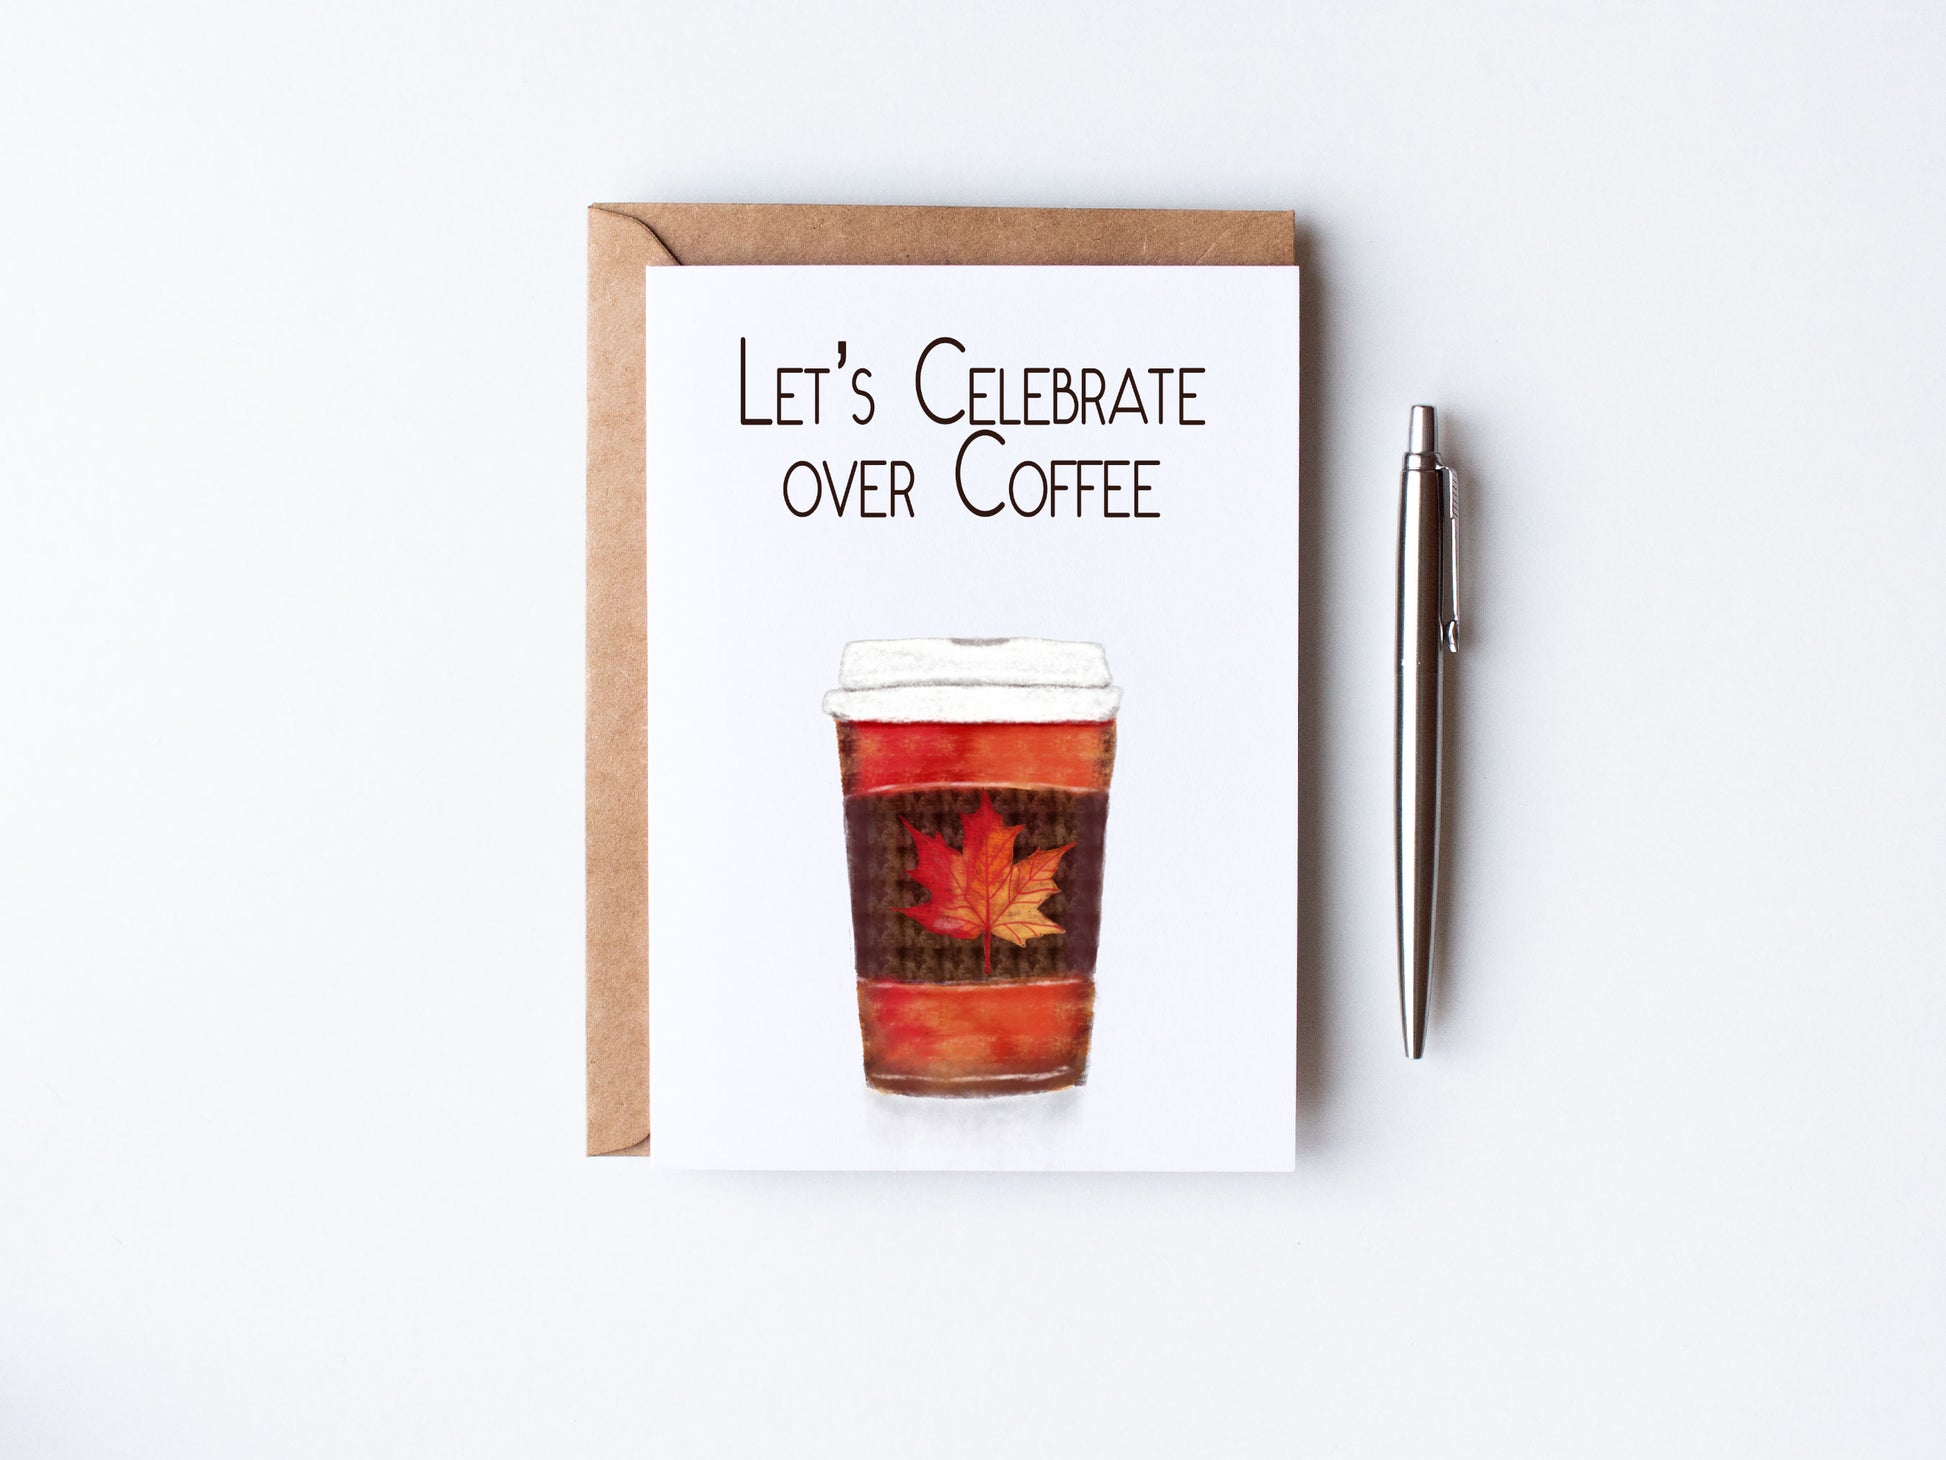 LEt's celebrate over coffee - hand illustrated coffee mug